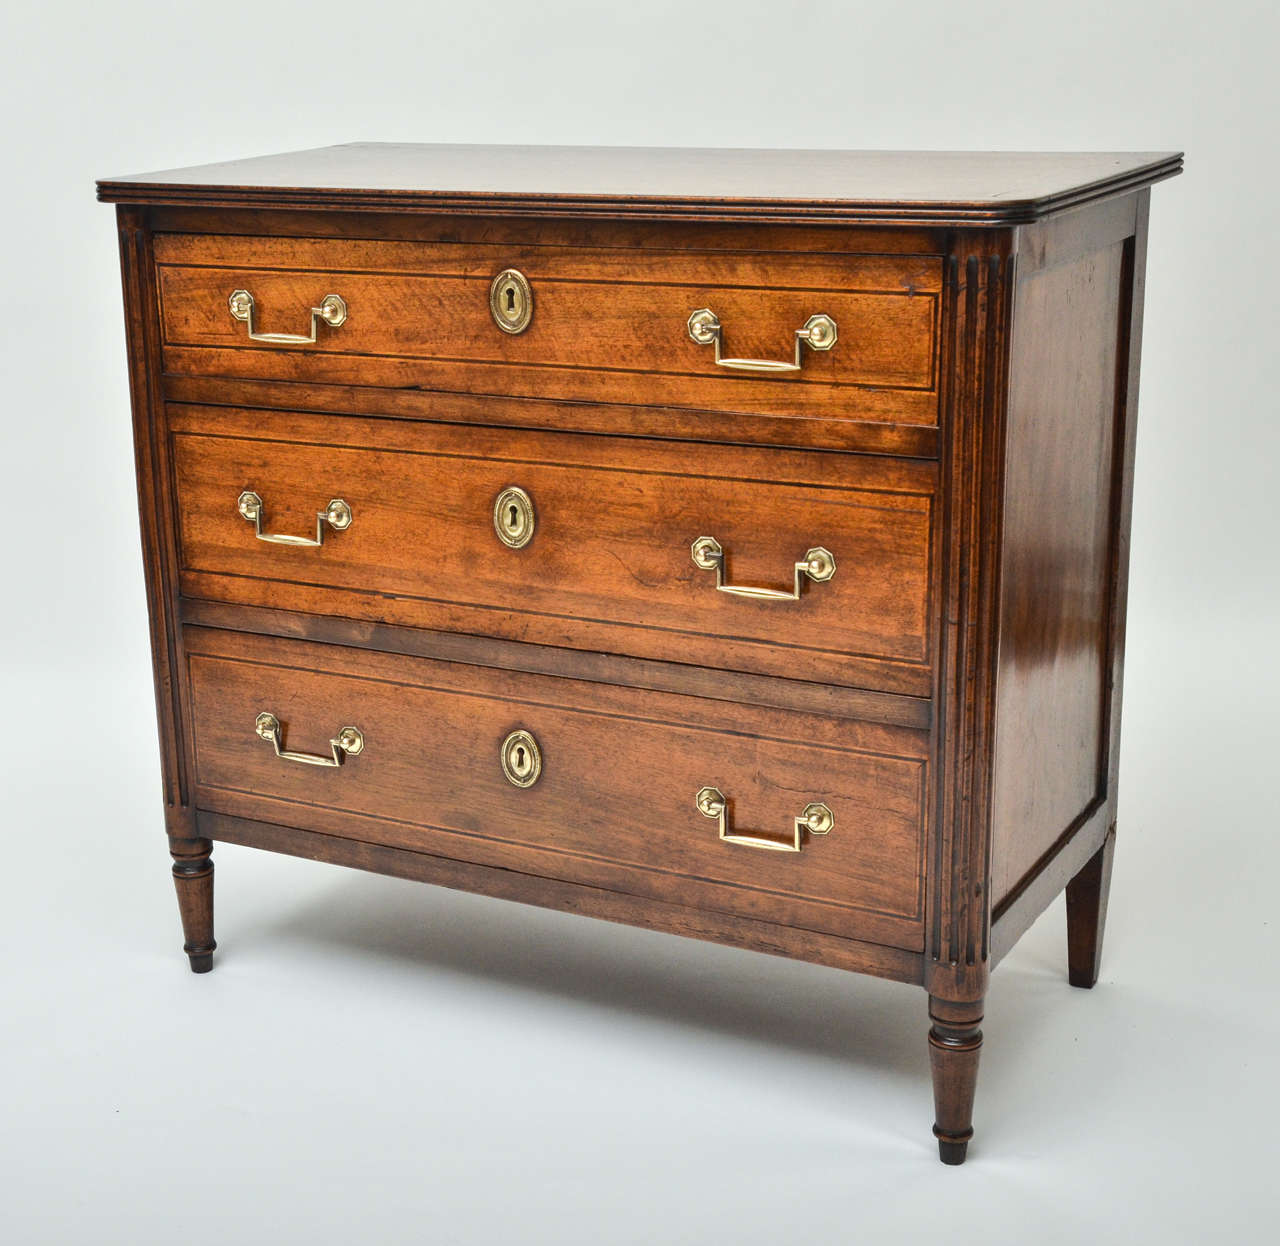 An early 19th century Italian walnut Chest of Drawers with three drawers, boxwood and ebony inlaid, reeded-molded top and brass pulls.